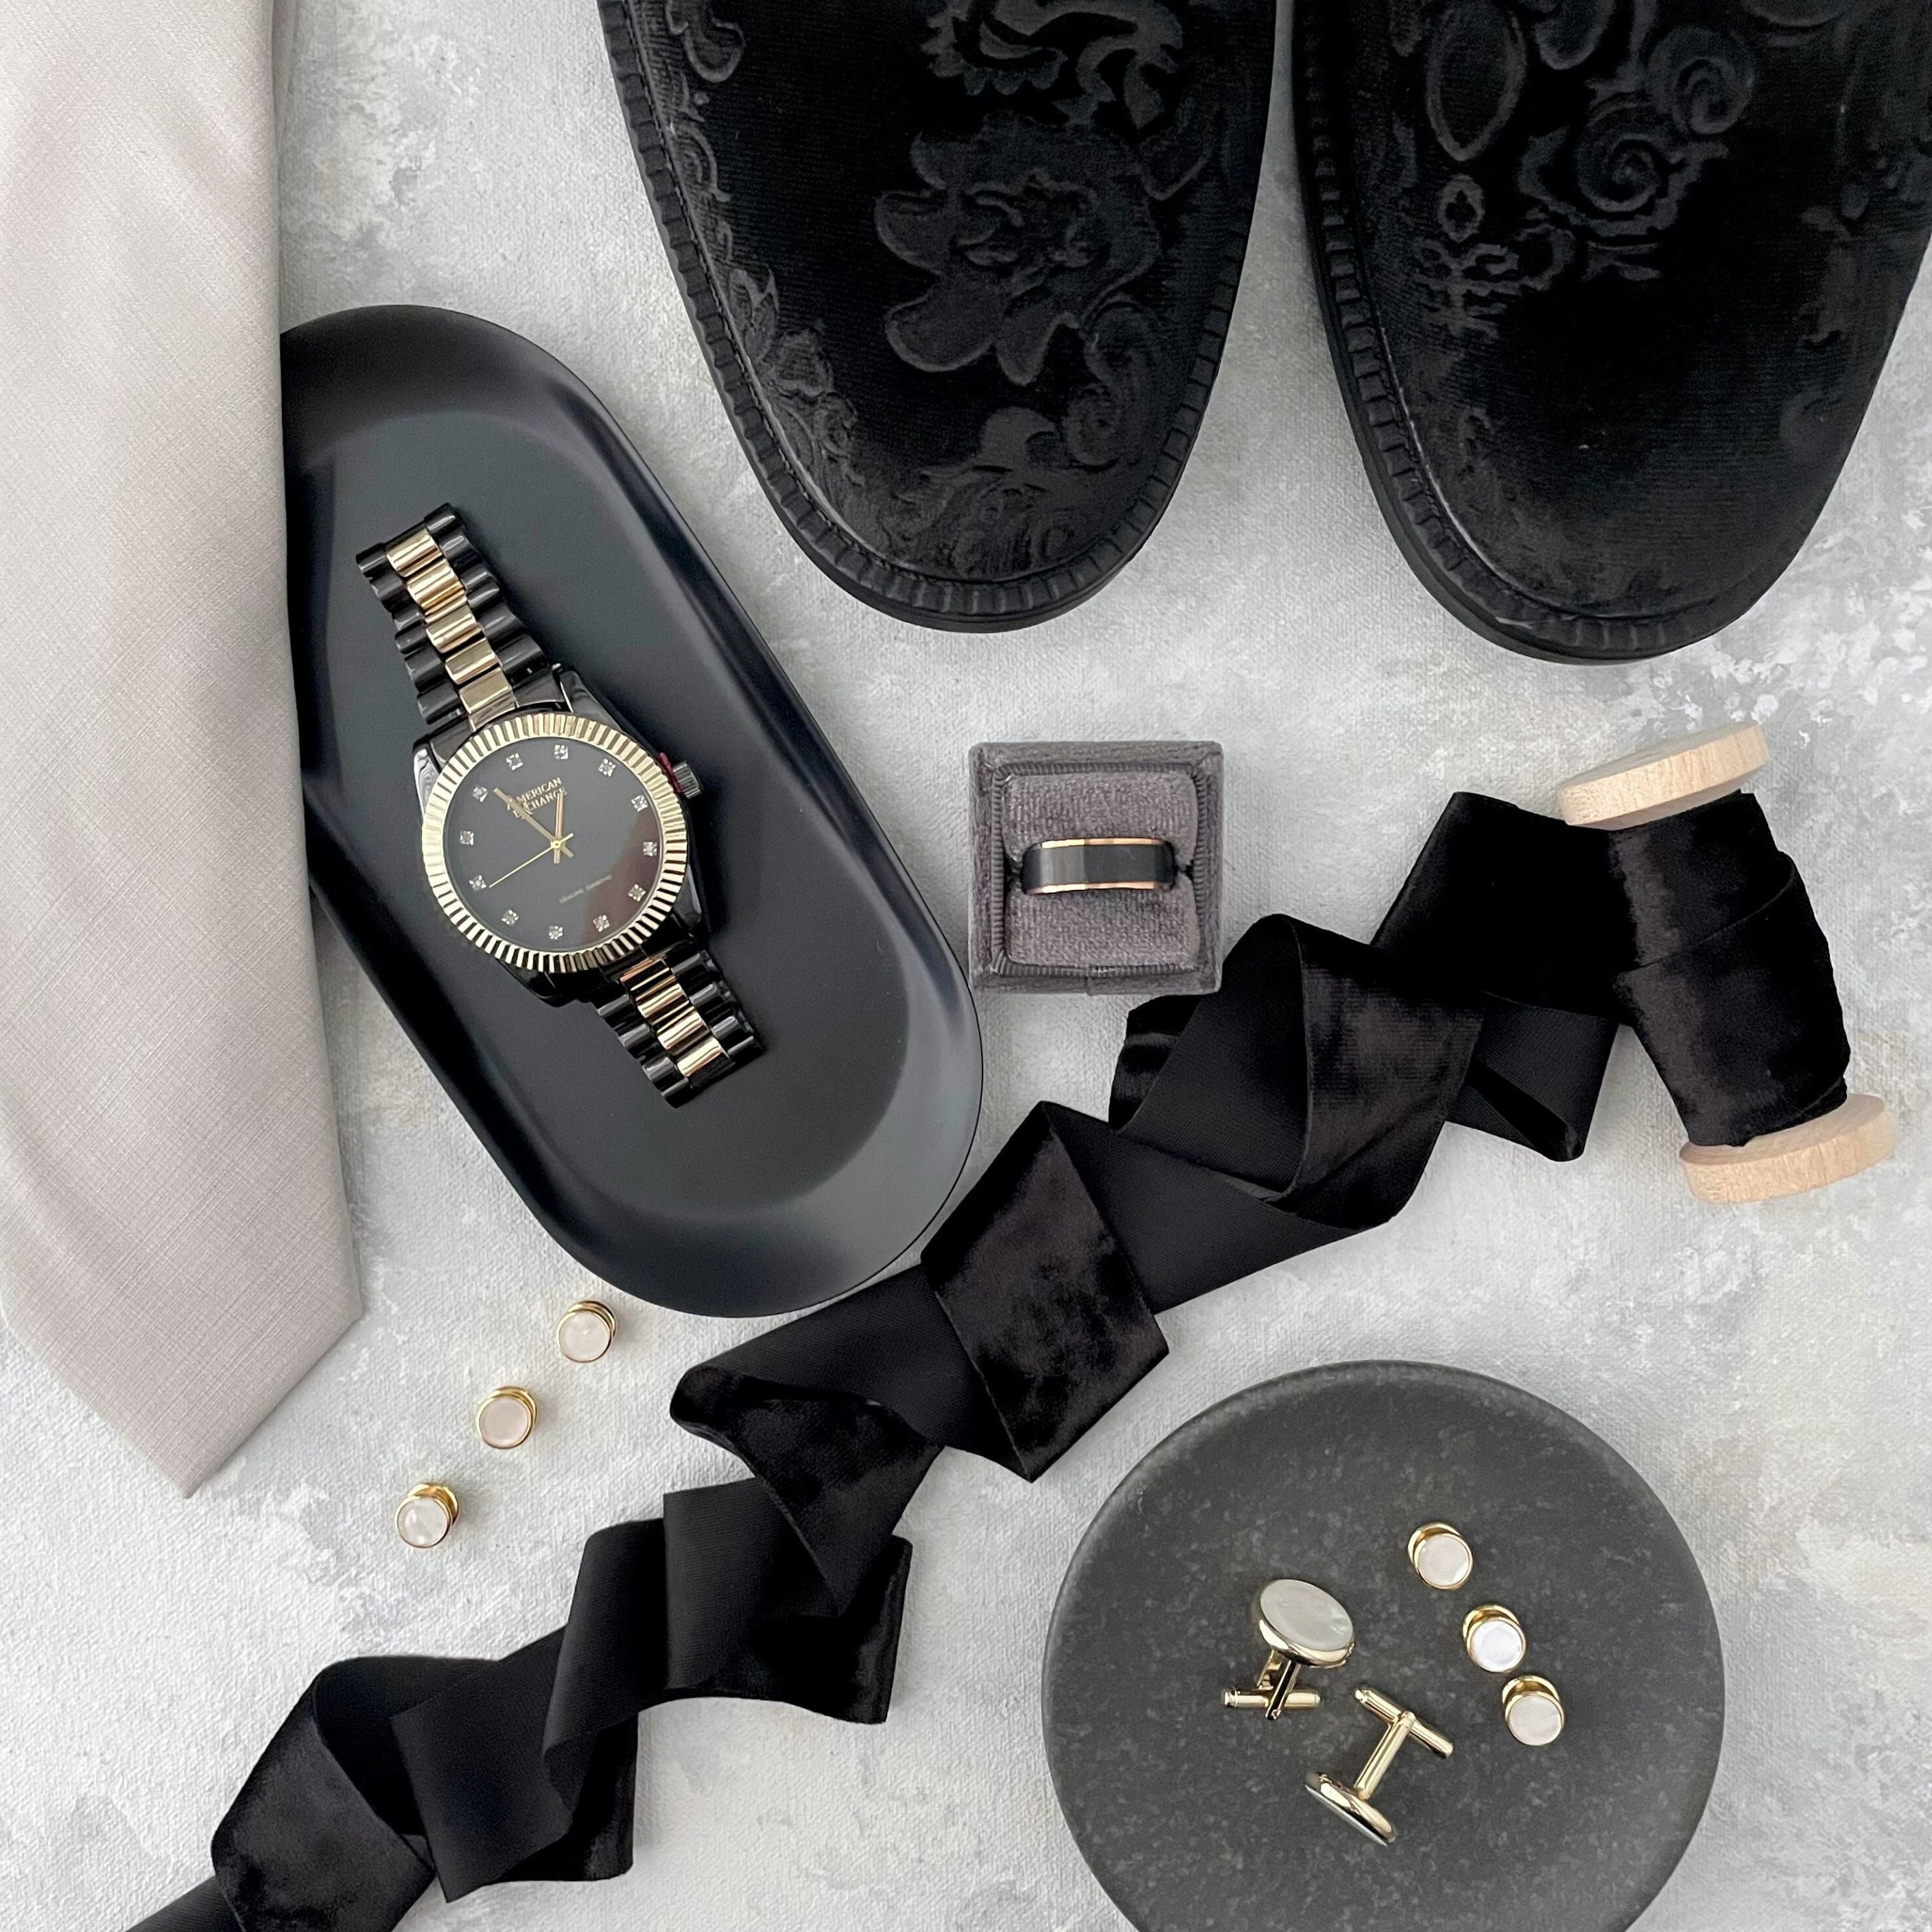 Black velvet mens shoes, with cufflinks, black and gold watch on a black oval dish, tan tie & black velvet ribbon on wood spool.  Gray square ring box with black grooms ring